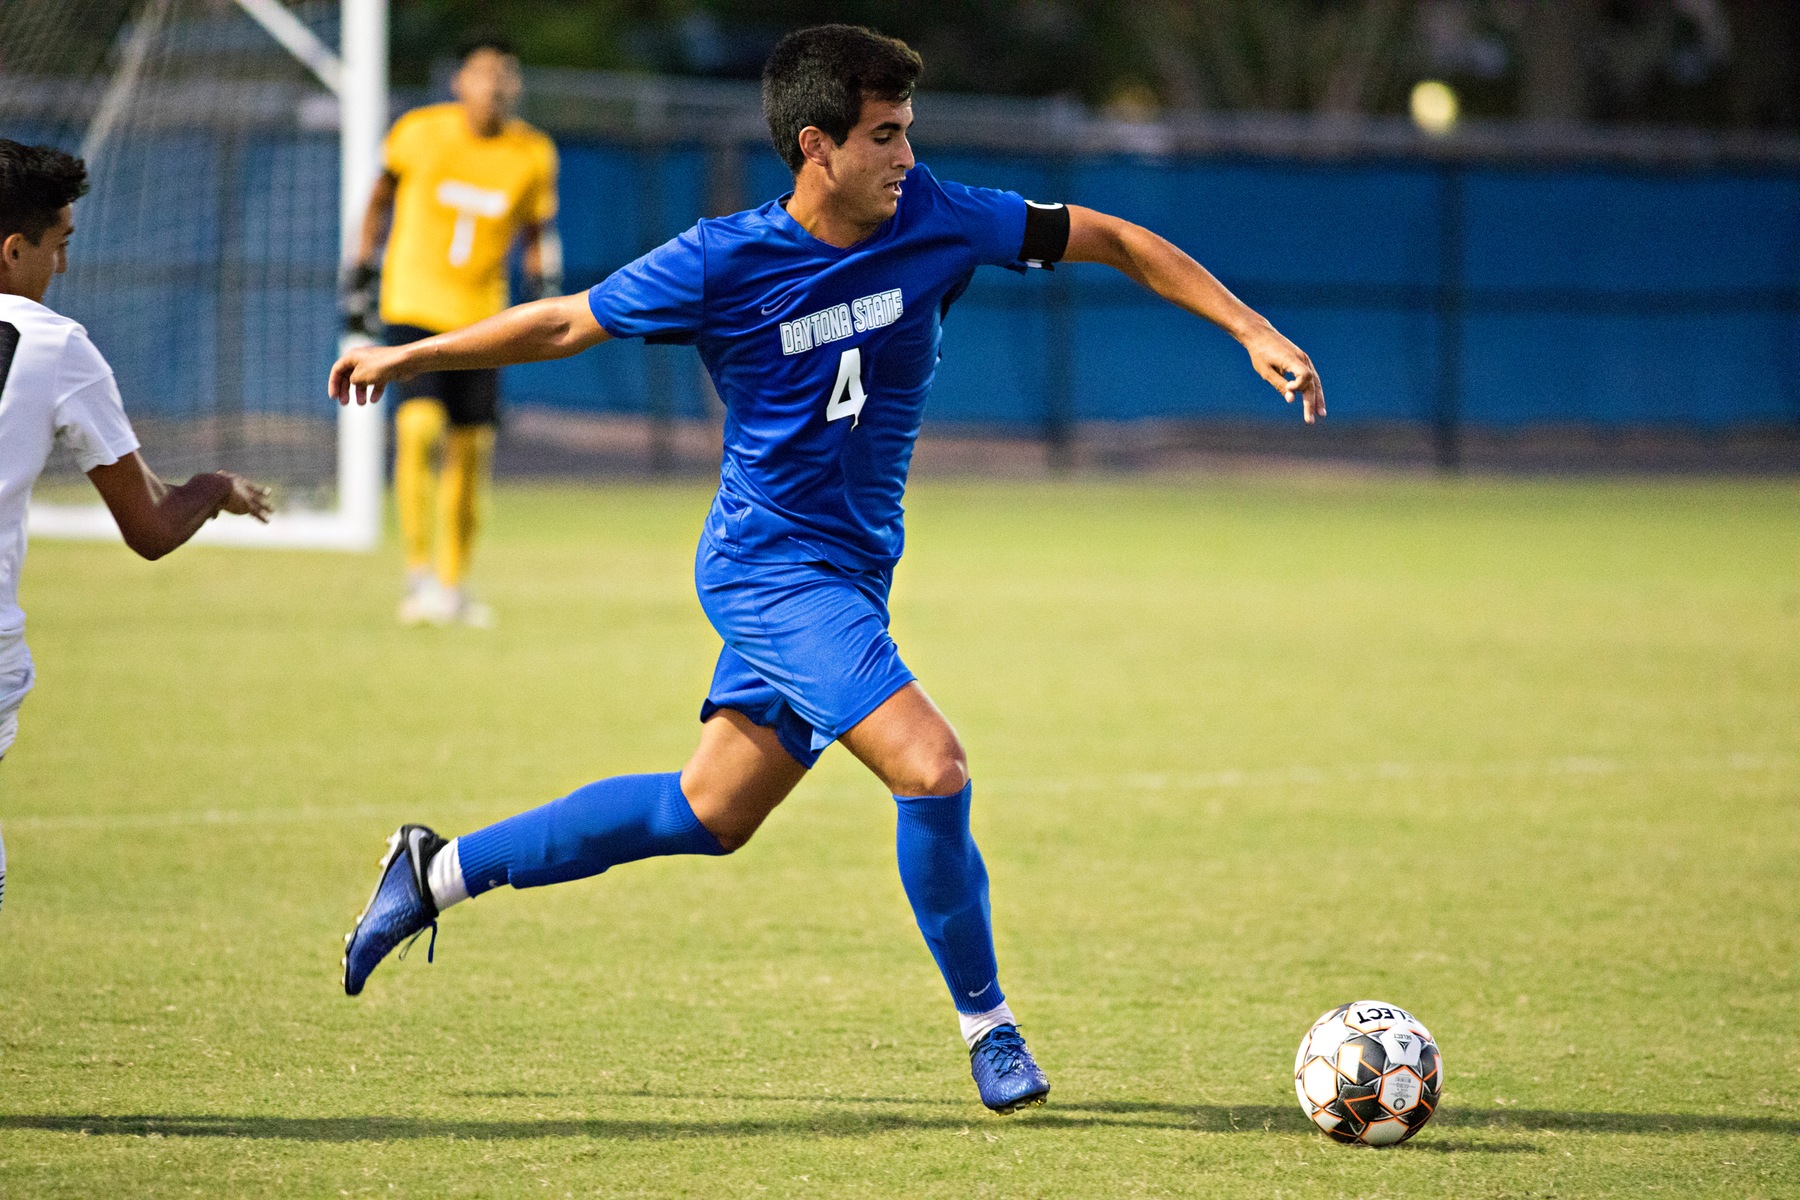 Men's Soccer Wins Two on the Road